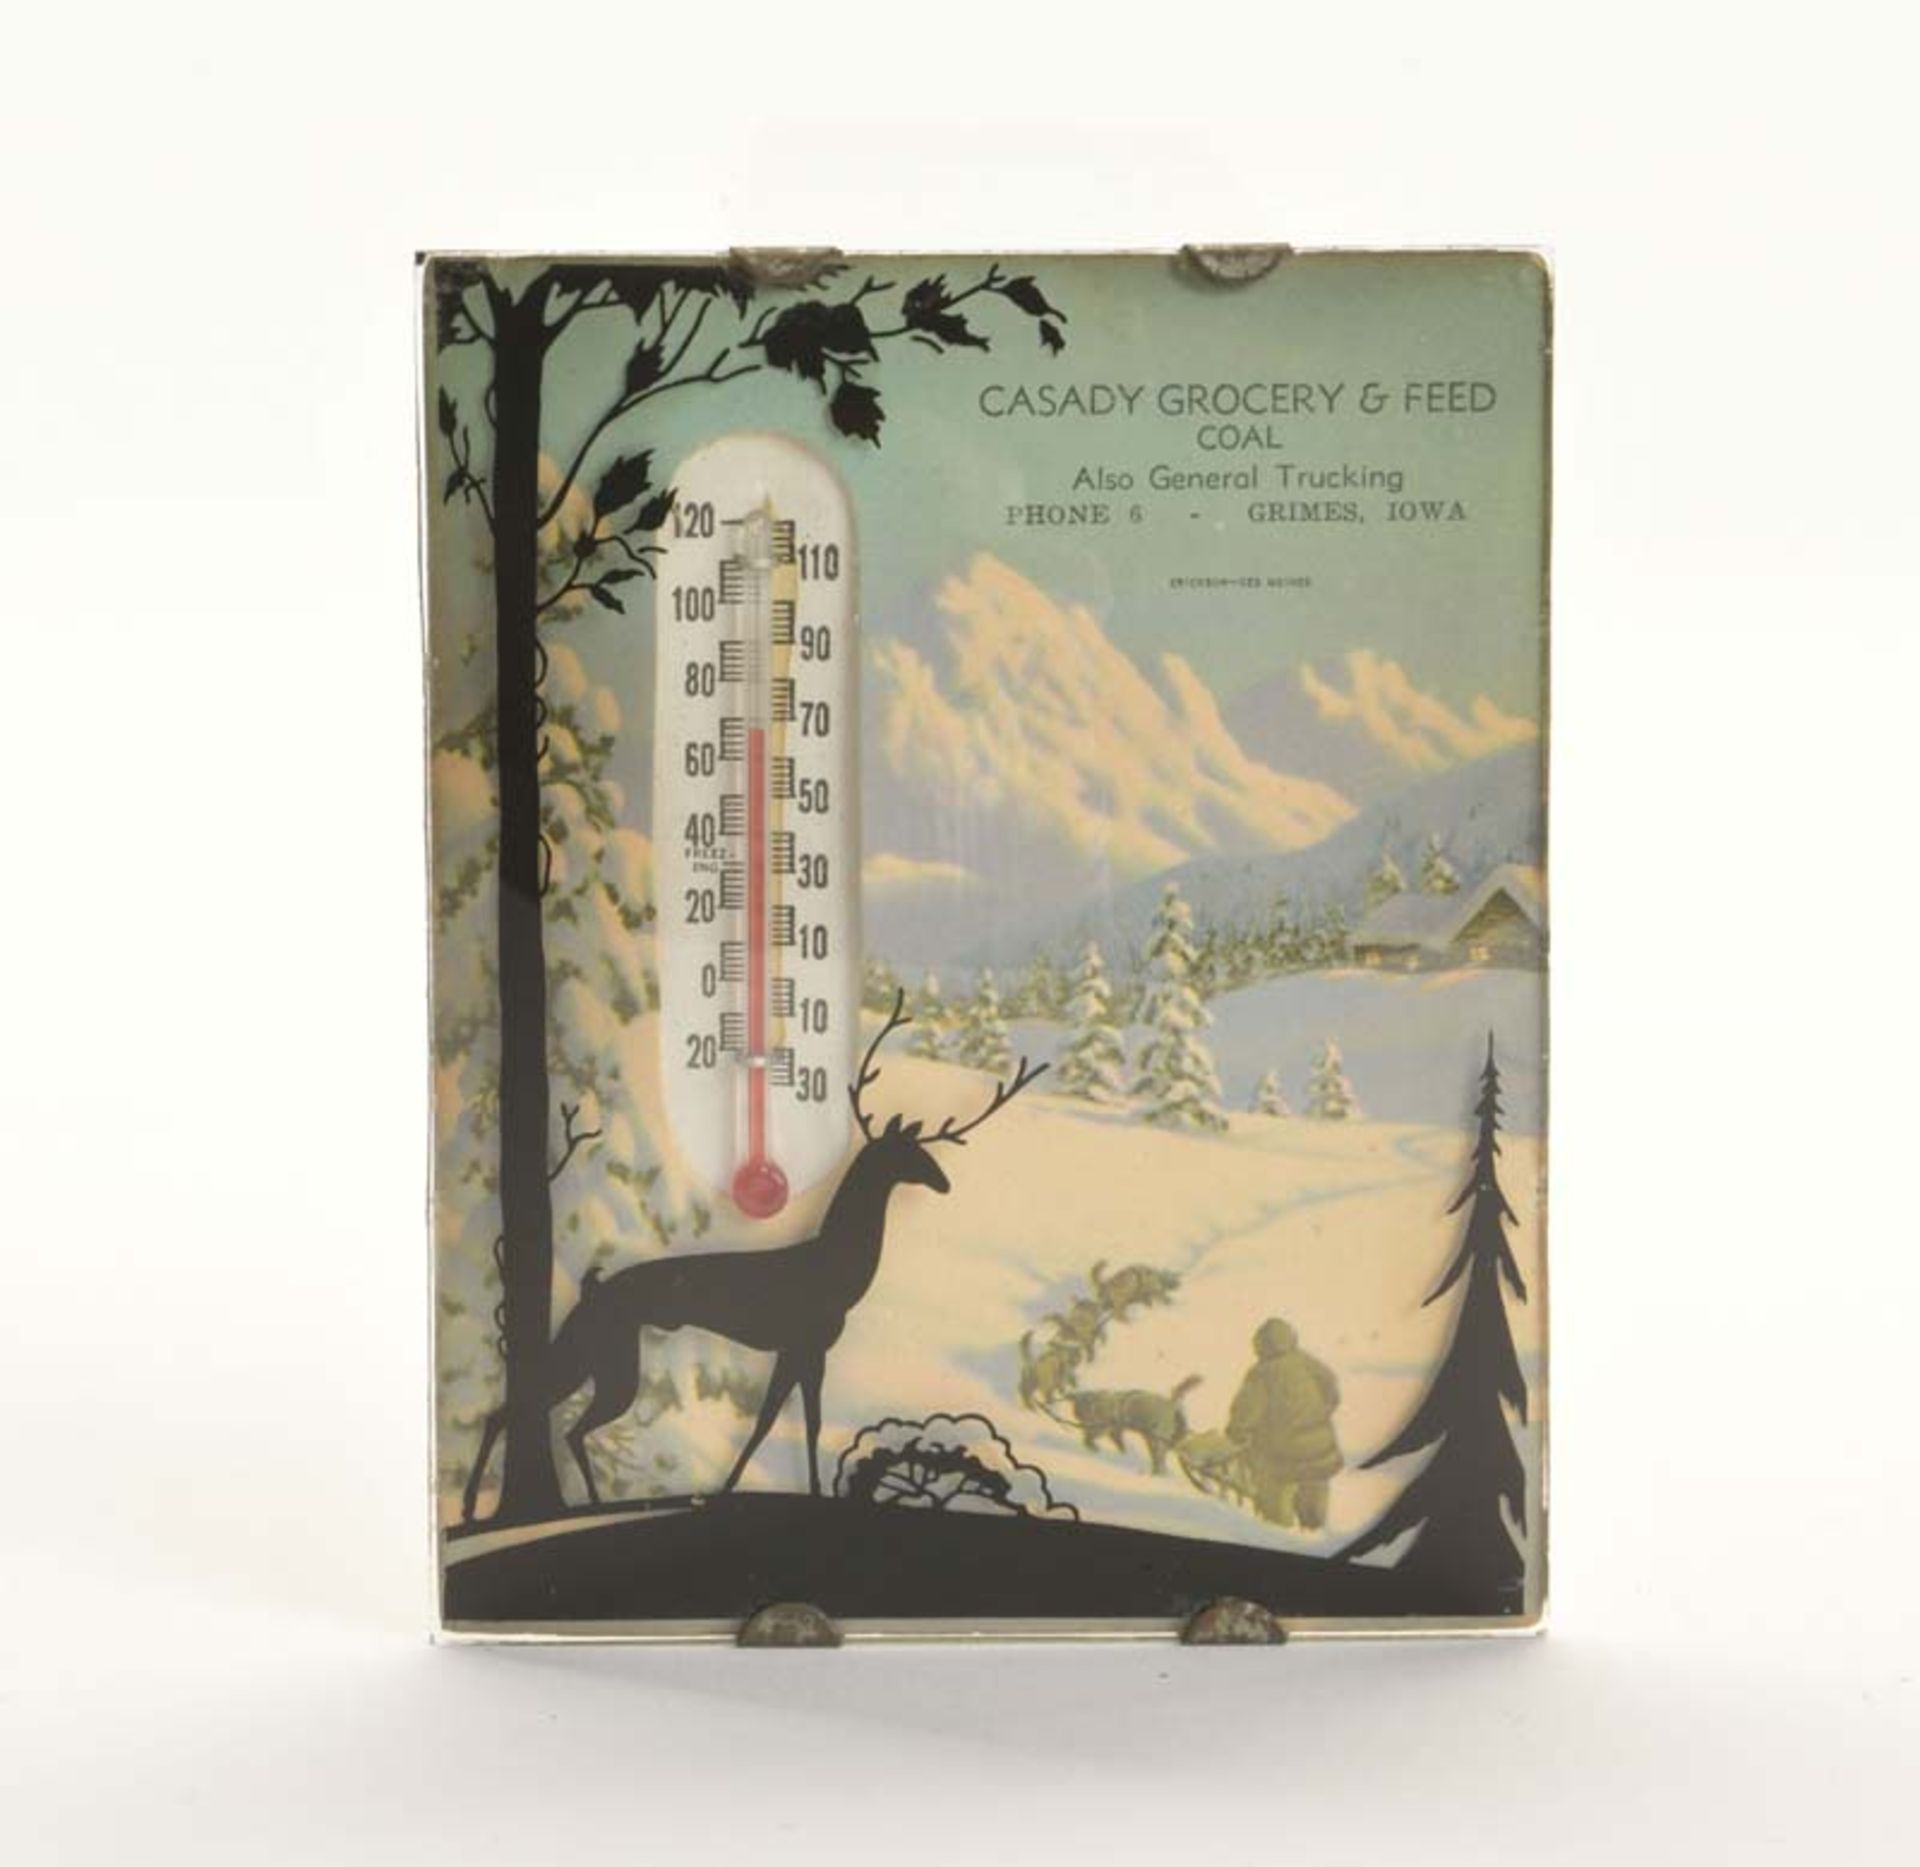 Thermometer "Casady Grocery & Feed Coal", USA, C 1-2